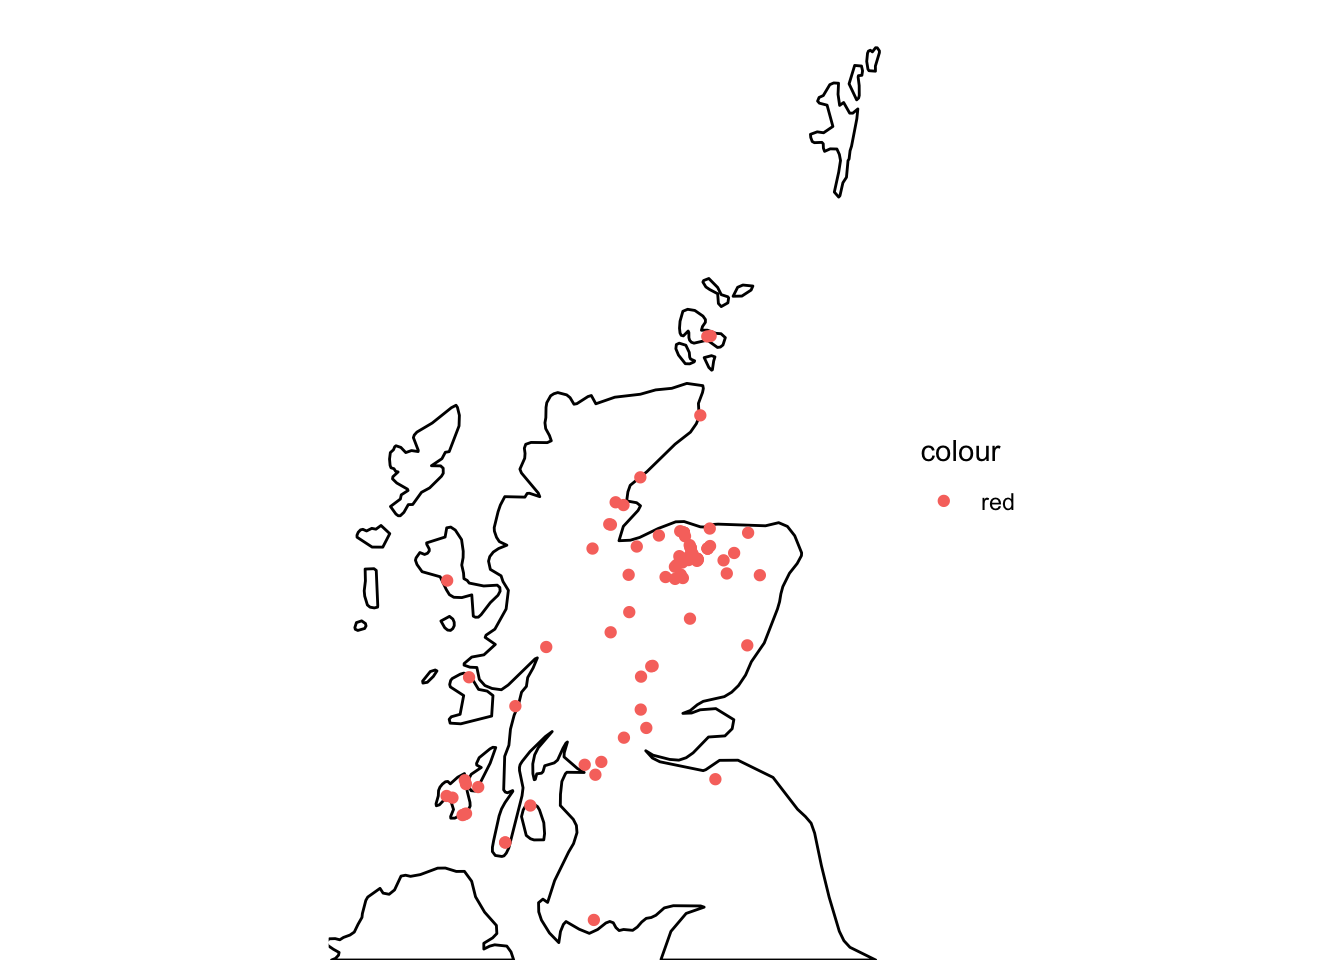 Map of Scotland showing the location of the whisky distilleries.